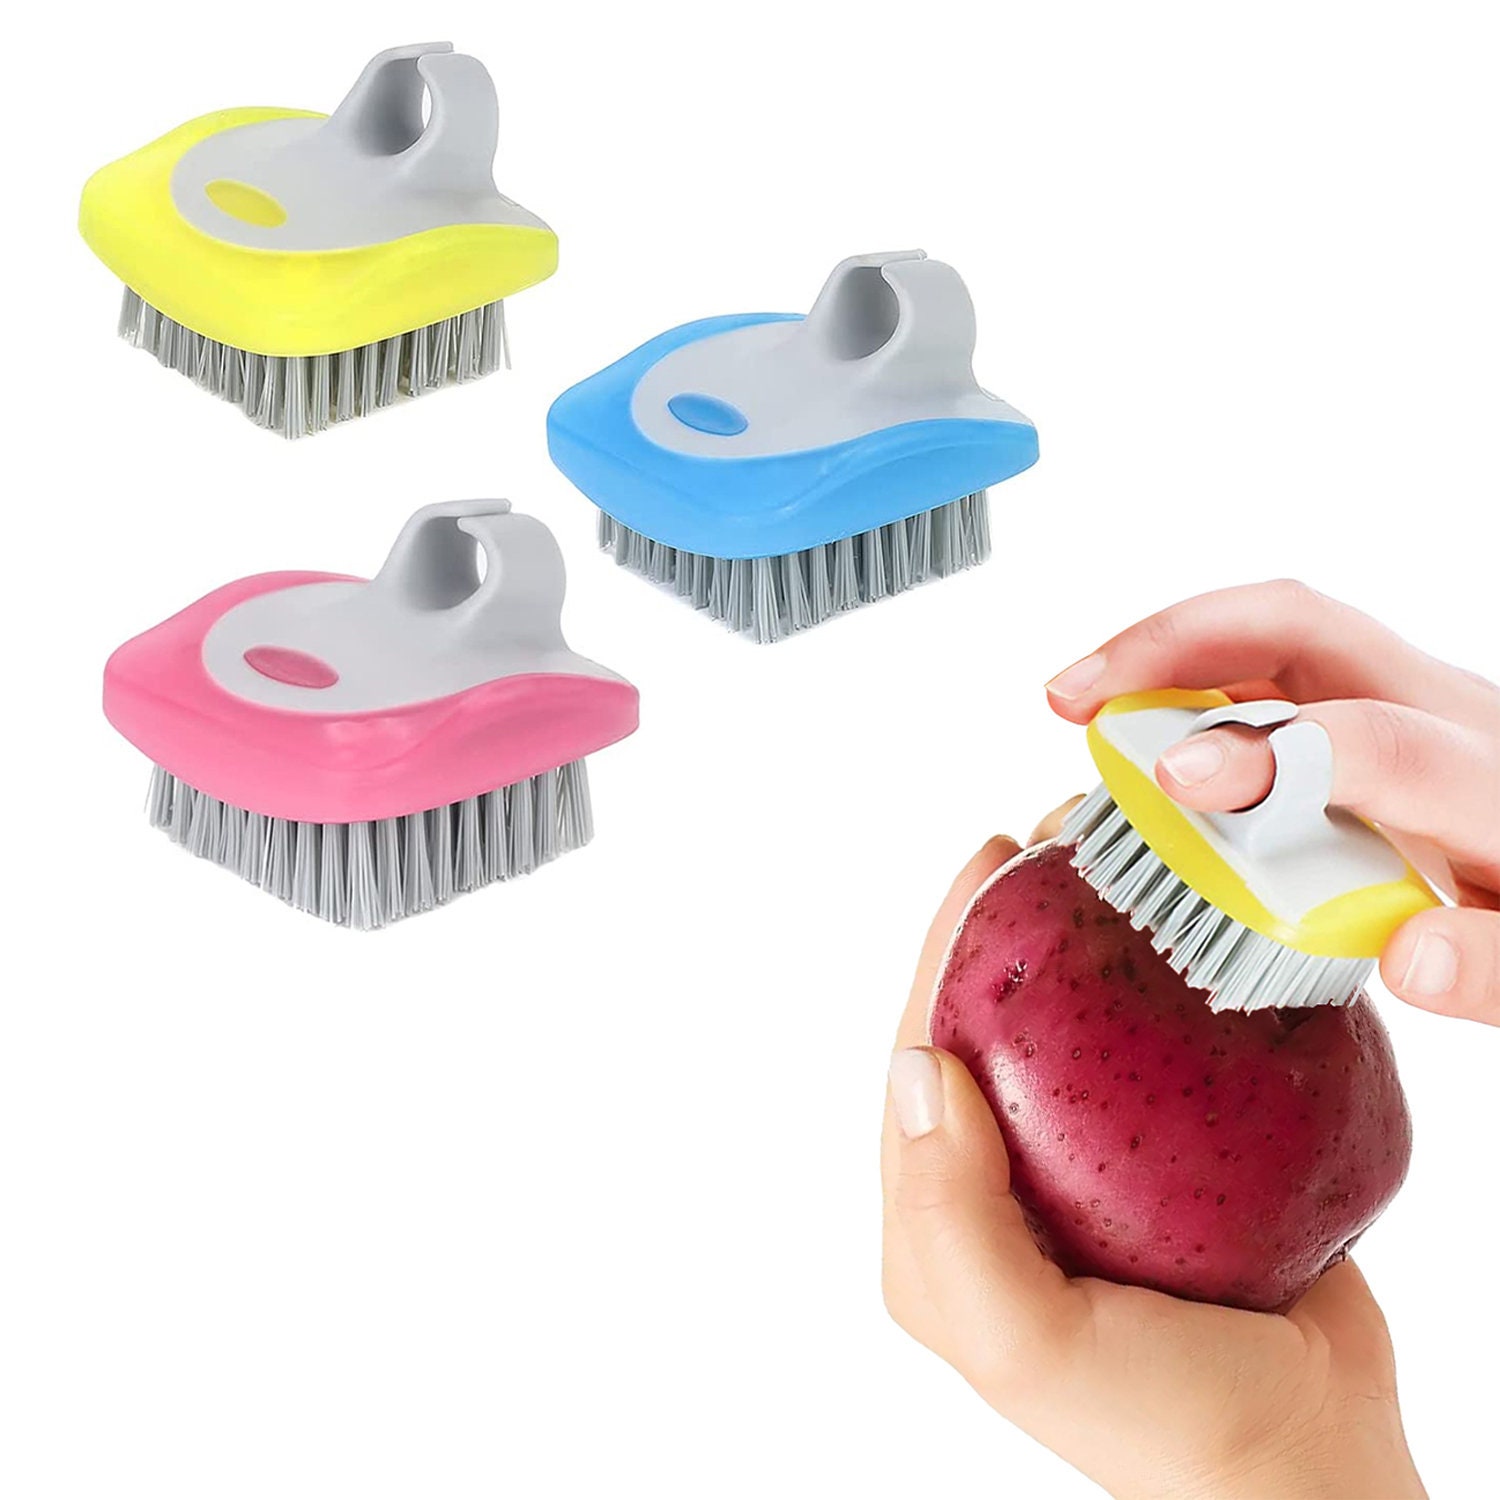 Homelove Fruits and Vegetable Cleaning Brush, Funny Potato Cleaning Brush, Gift for Grandma, Mother, Mom, Women, Father, Grandfather